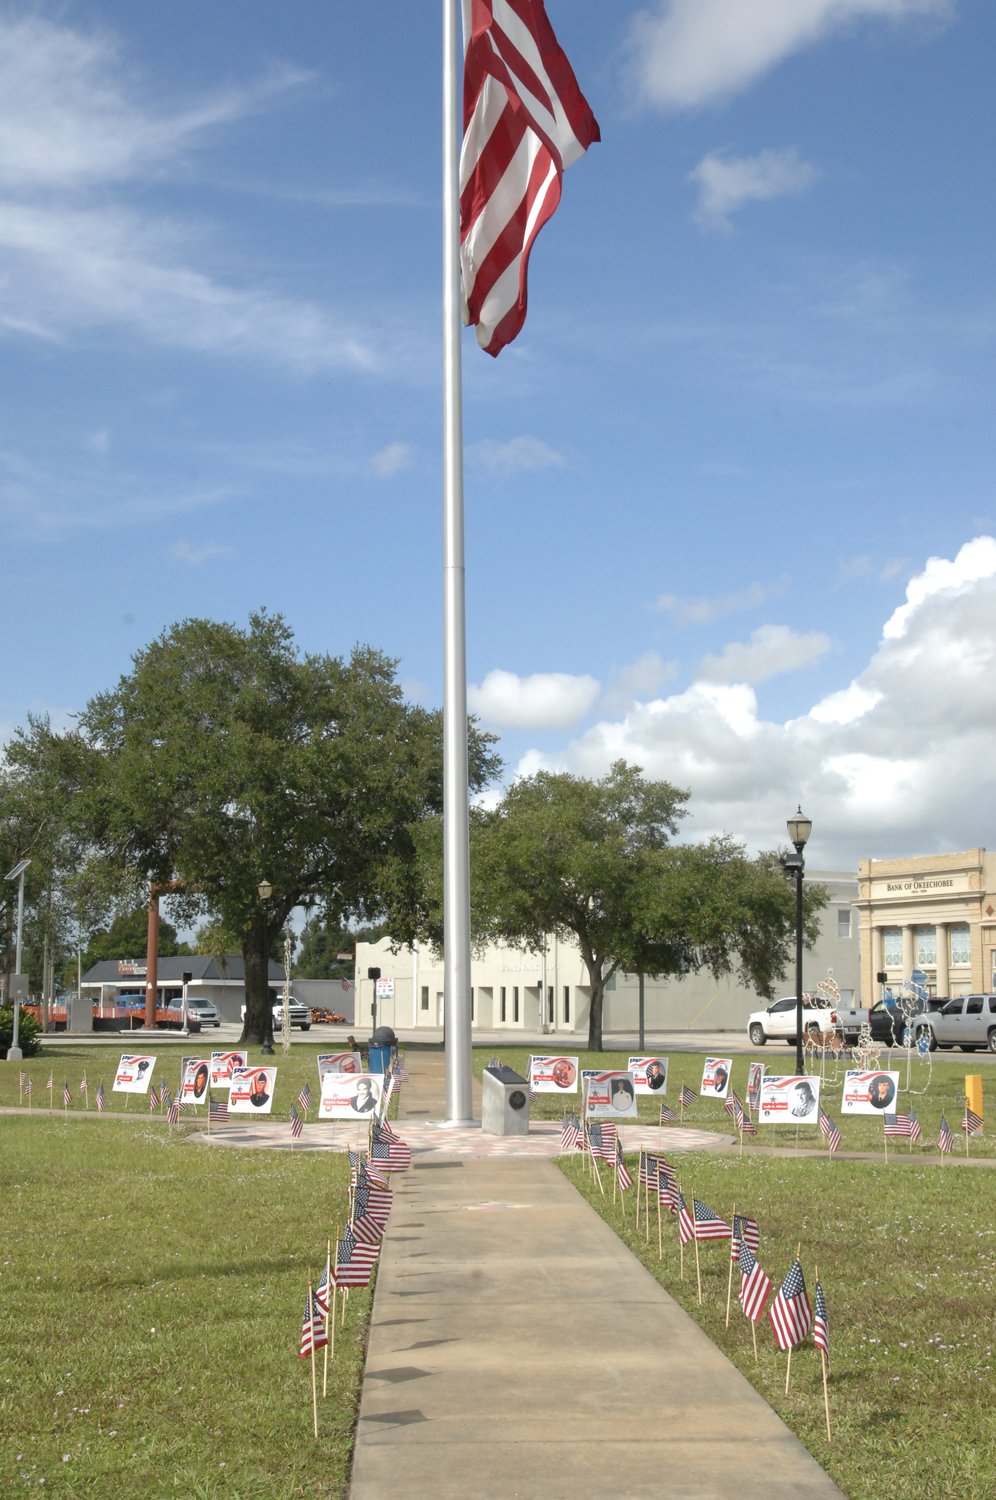 Around the flagpole in Park 4 of Flagler Park, signs honor local veterans.